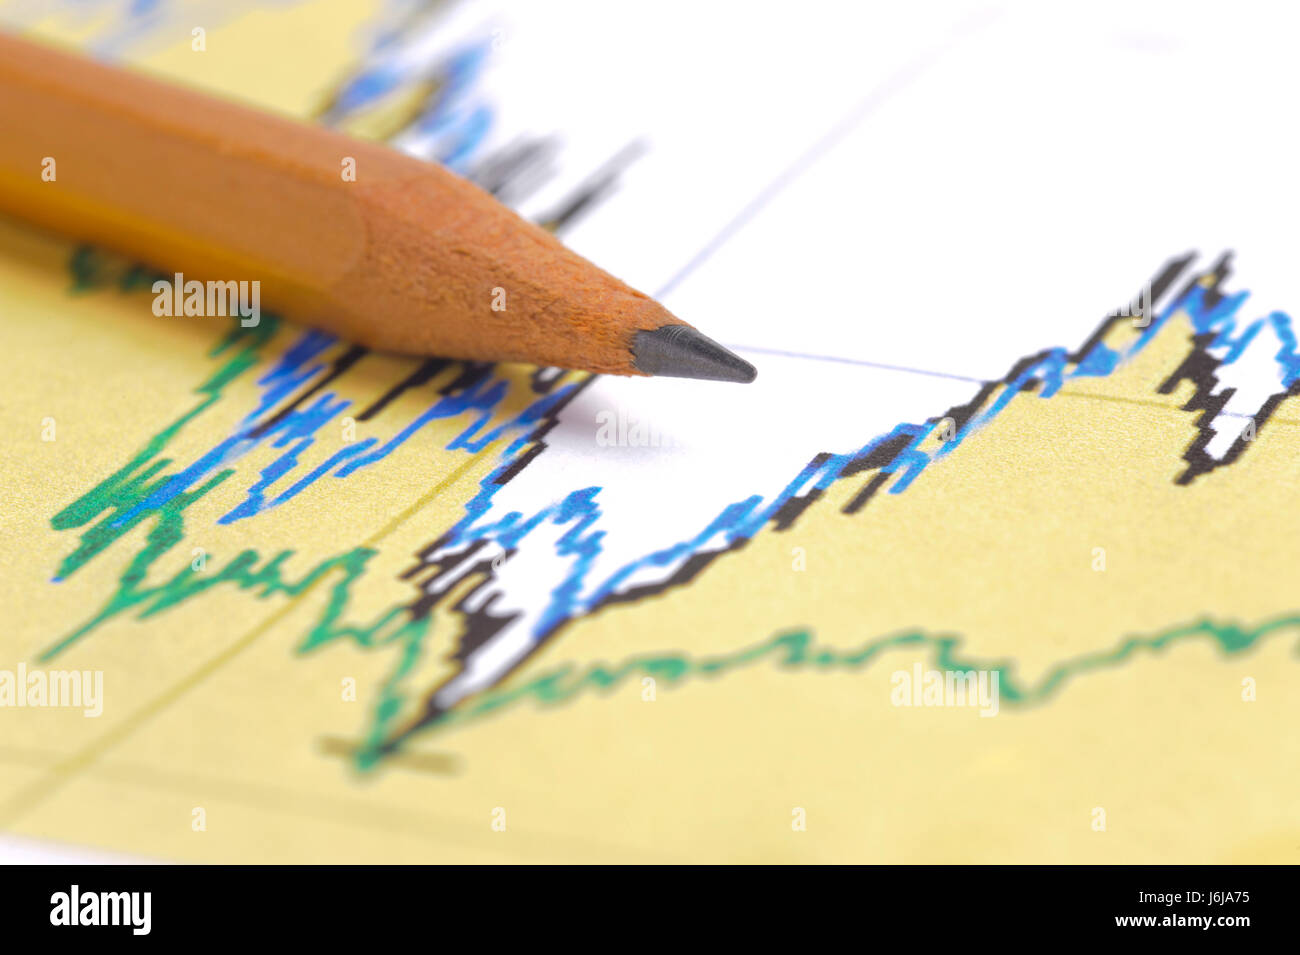 financial chart and pencil shows success at exchange market Stock Photo